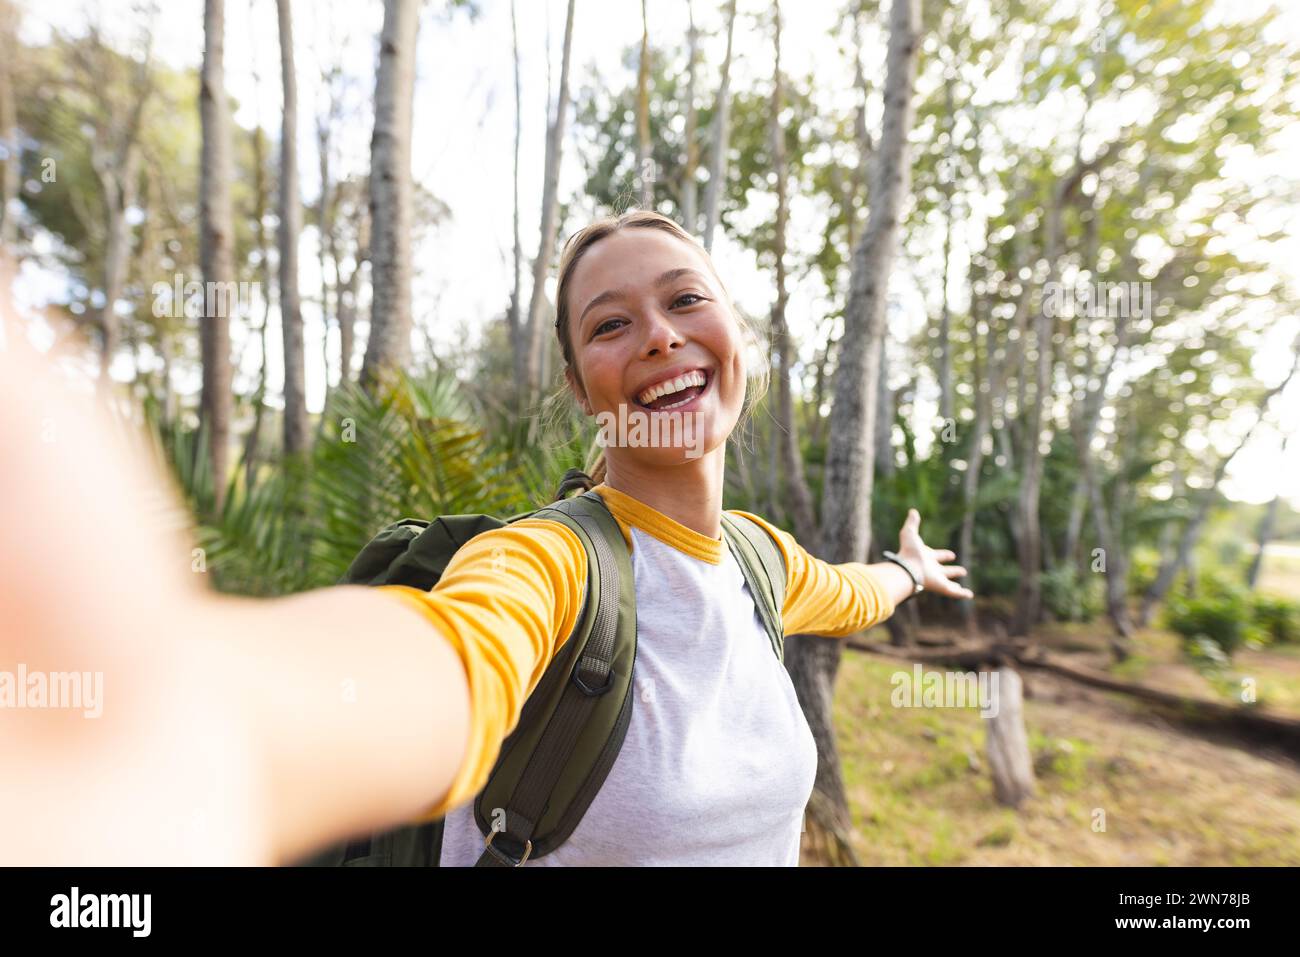 Young Caucasian woman takes a selfie with a beaming smile in a forest setting on a hike Stock Photo